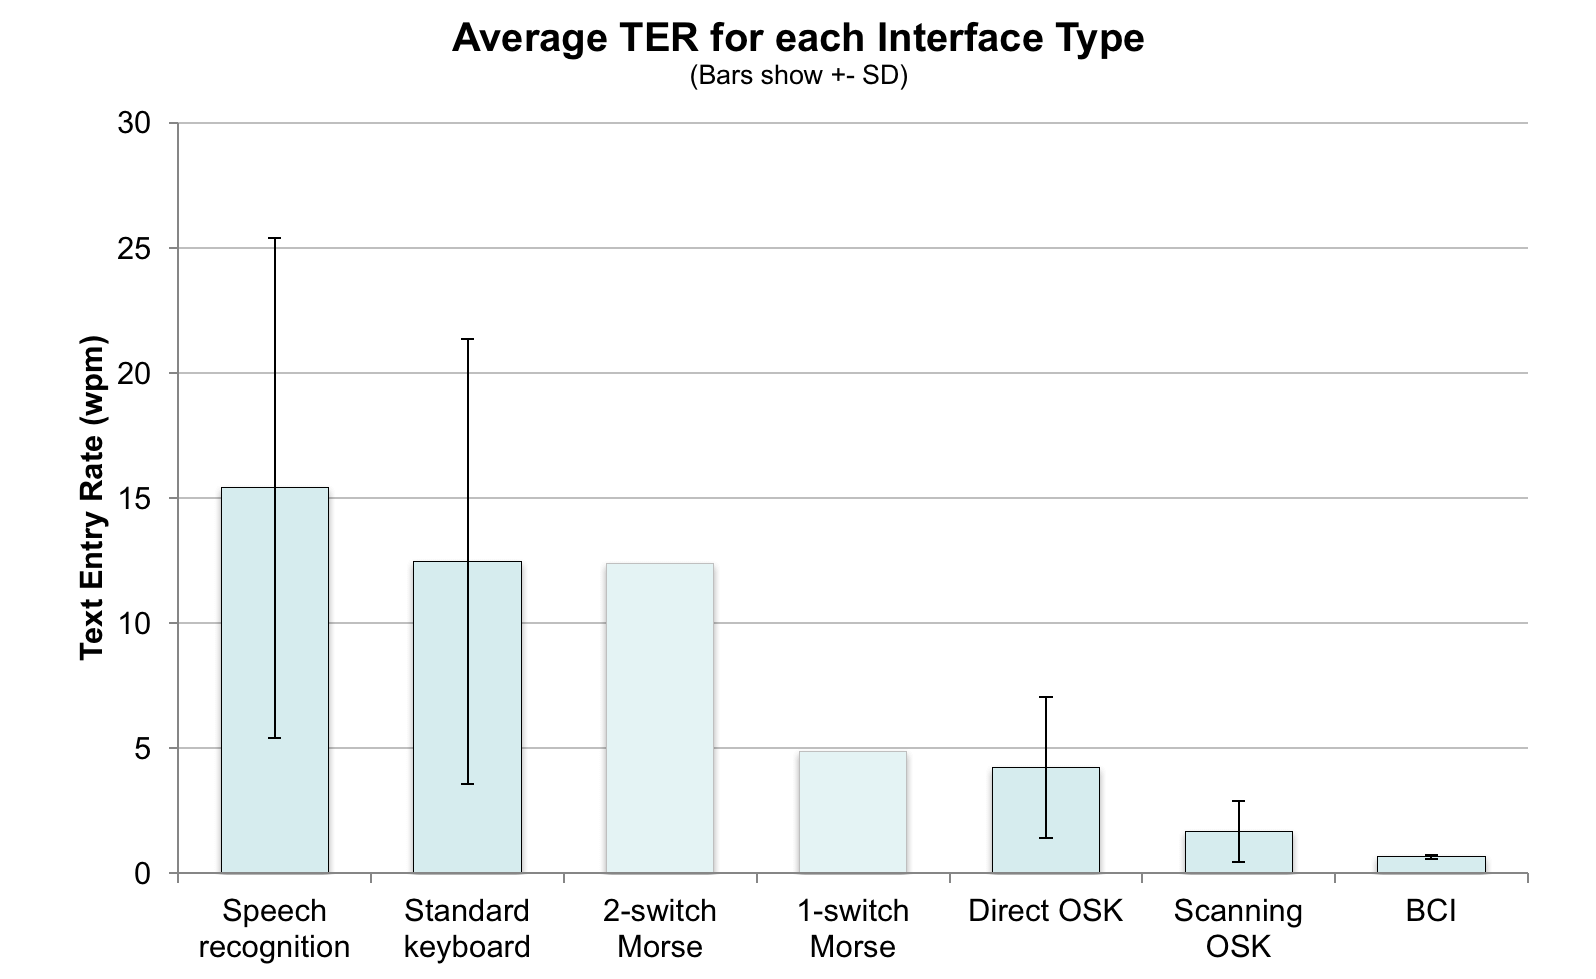 A graph showing average text entry rate for 7 interface types. Typing speeds for each interface in order of speed are: automatic speech recognition at 15.4 wpm, standard keyboard typing at 12.5 wpm, Morse code at 12.4 for 2-switch and 4.9 for 1-switch, on-screen keyboard with cursor selection at 4.24 wpm, on-screen keyboard with scanning selection at 1.67 wpm, and brain-computer interface at 0.66 wpm